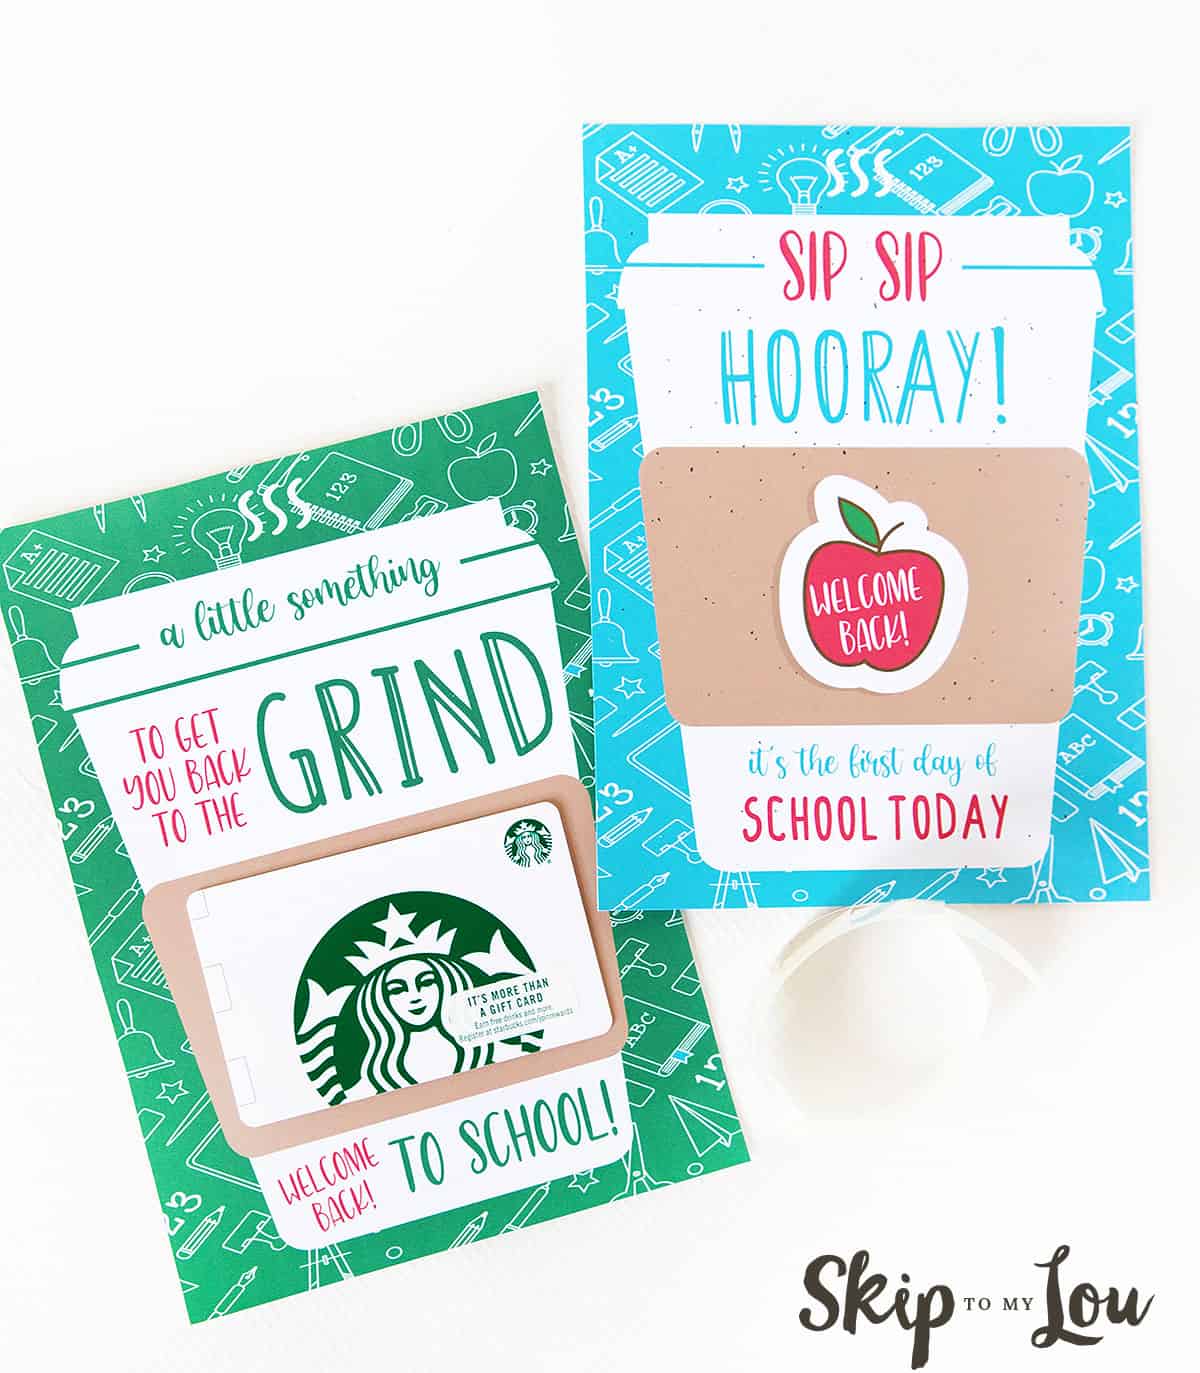 two printable back to school cards for coffee gift cards